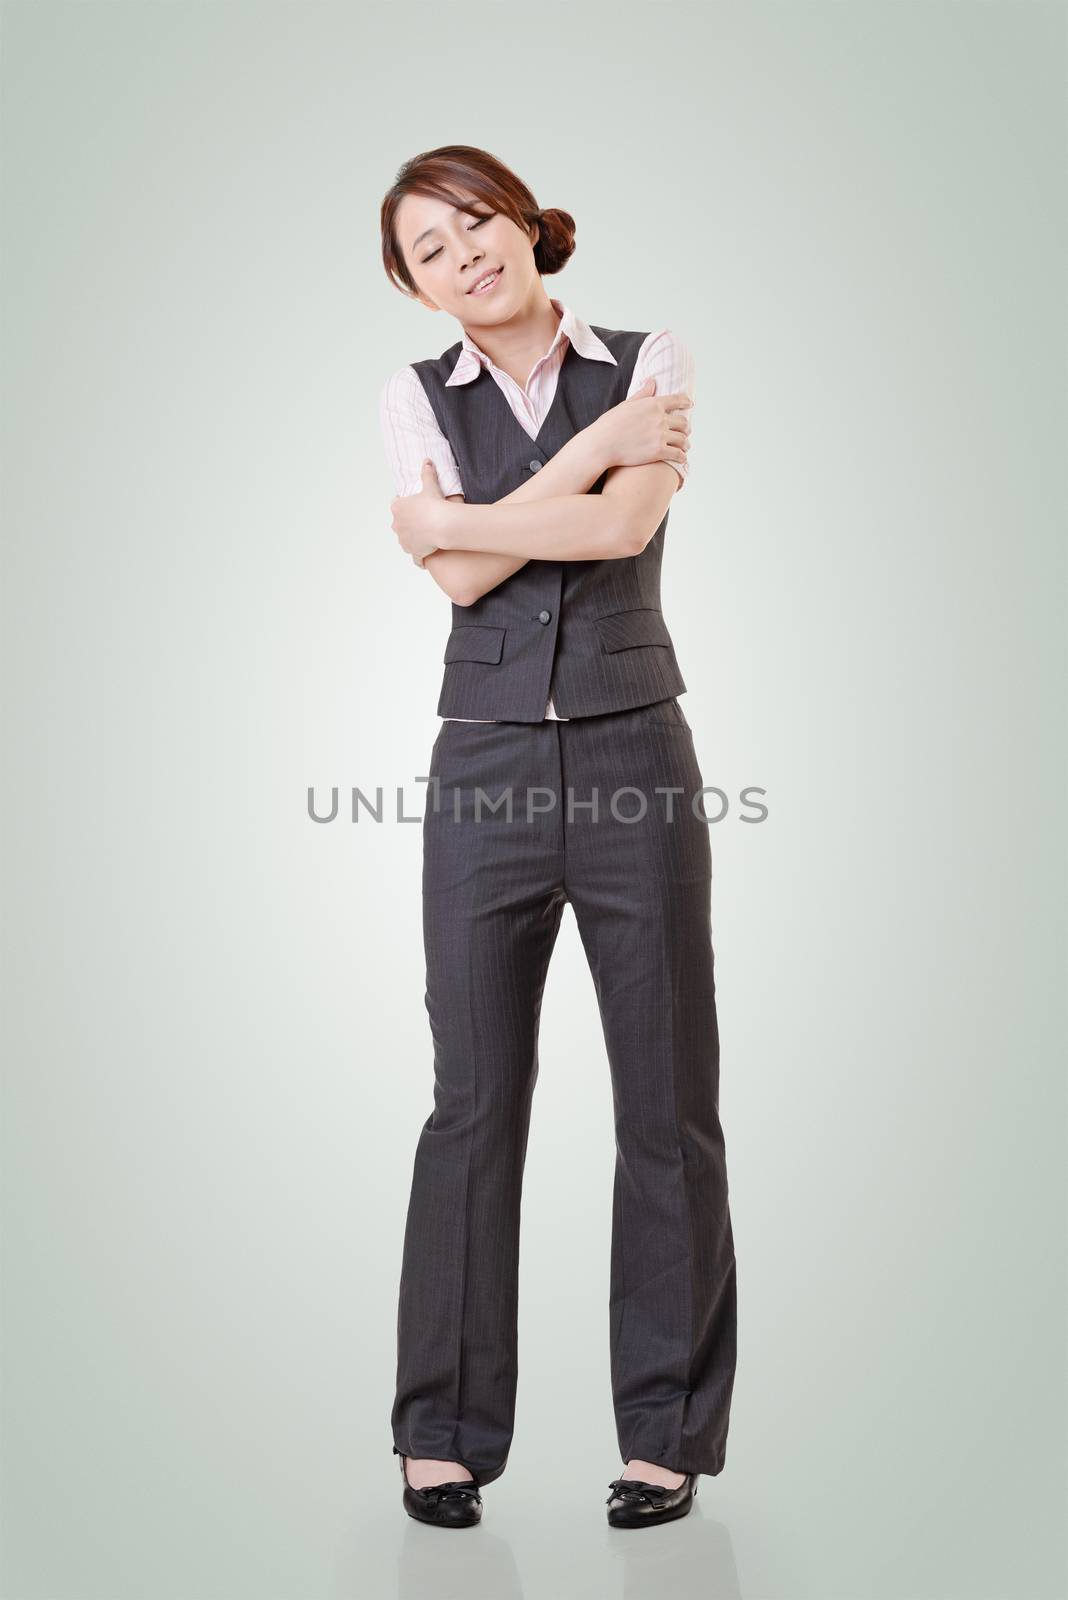 Attractive young business woman of Asian, full length portrait with clipping path.